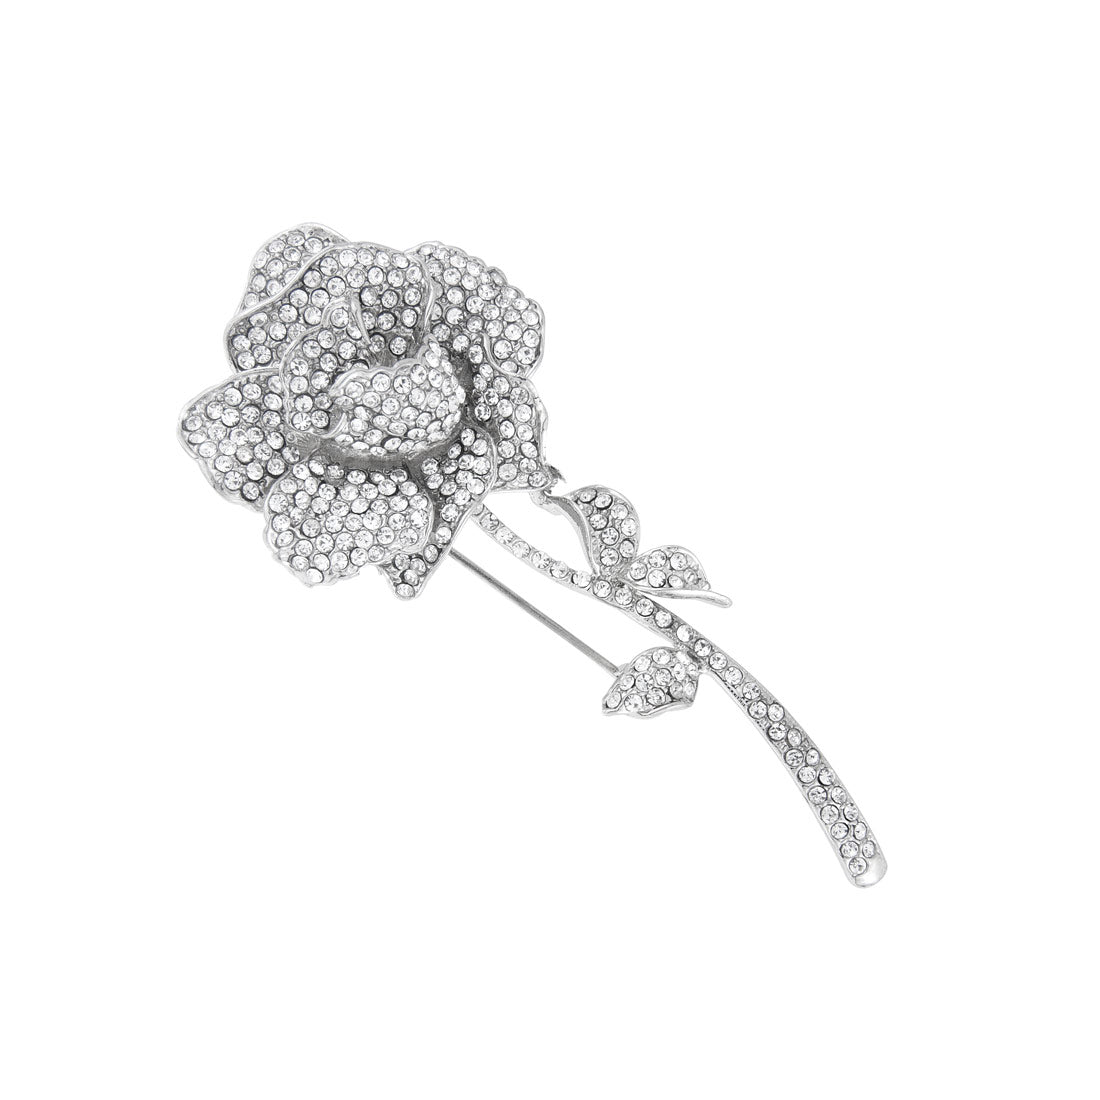 Corsage of Beauty Crystal Flower Brooch